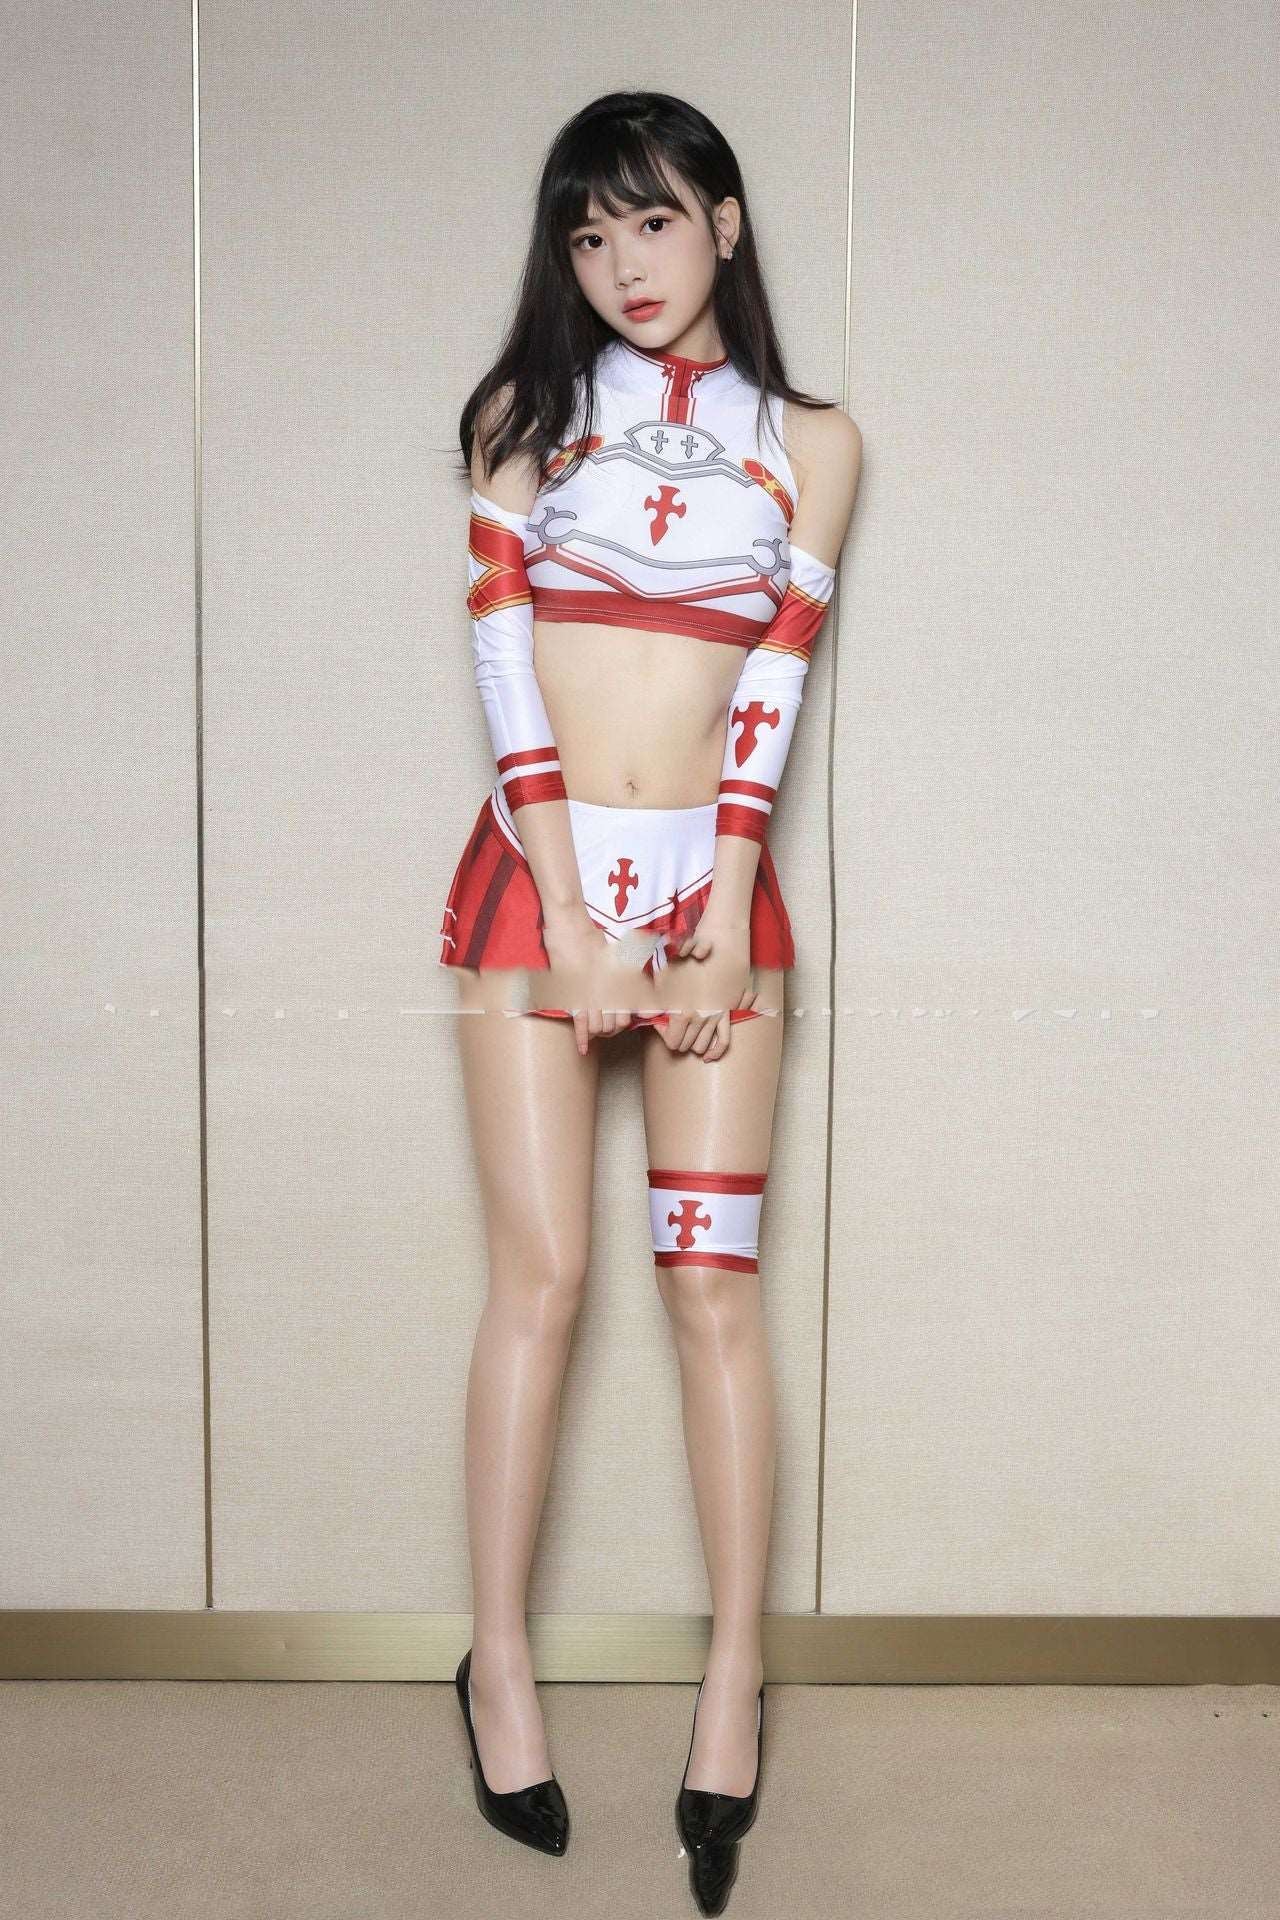 Sexy Lingerie Anime Game Costume